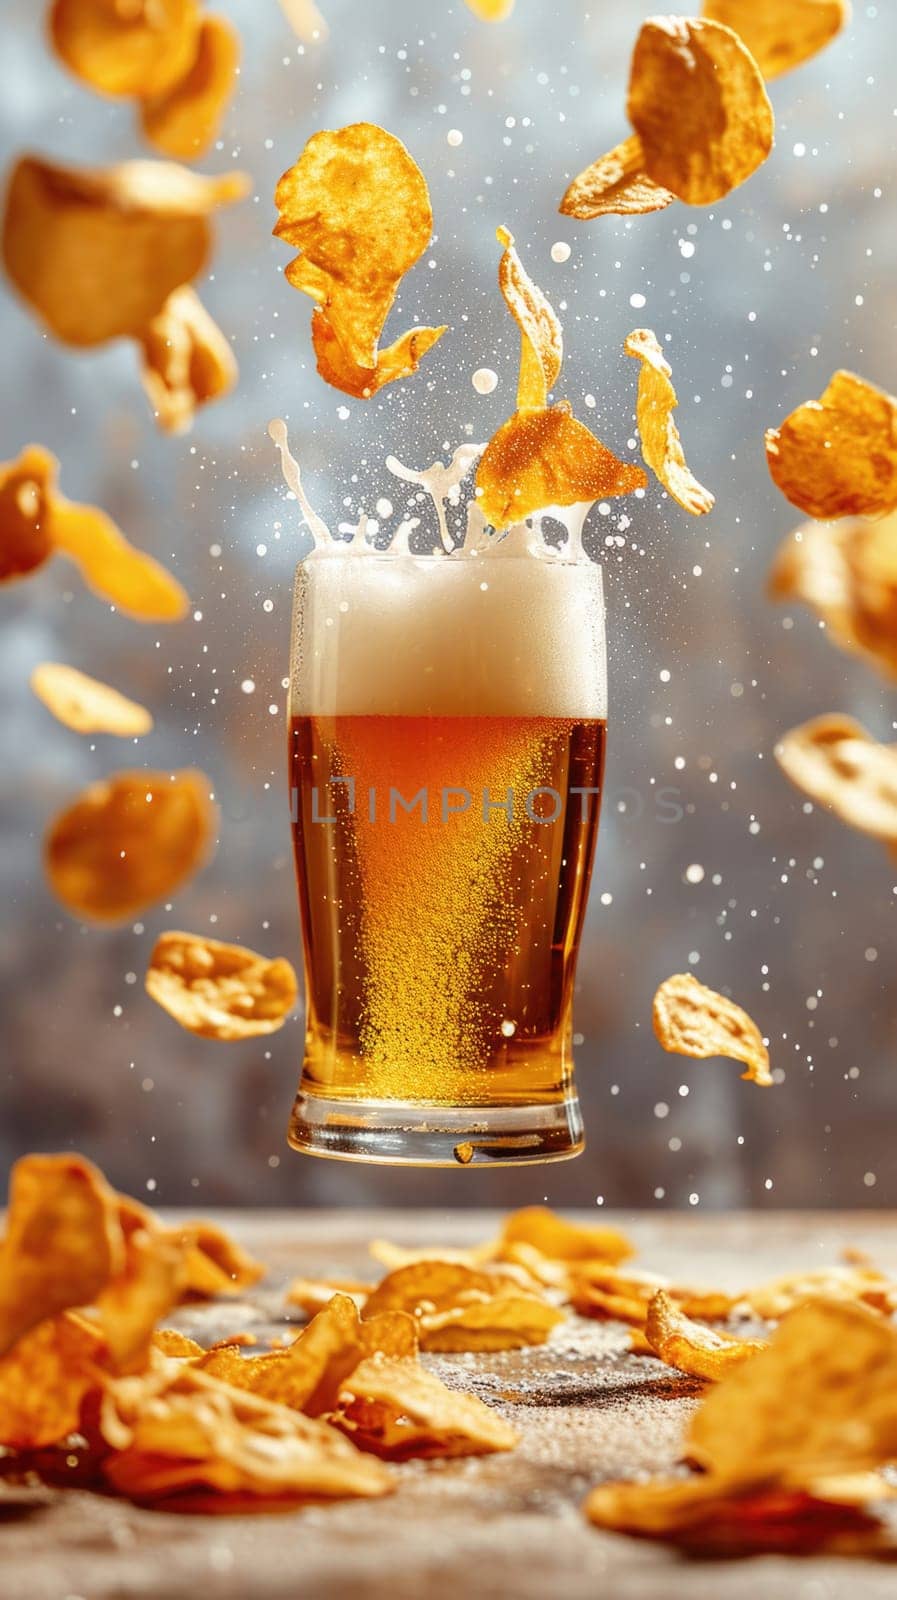 Mysterious image: potato chips seem to float in the air above a glass of fresh beer, creating a mysterious and unusual atmosphere.